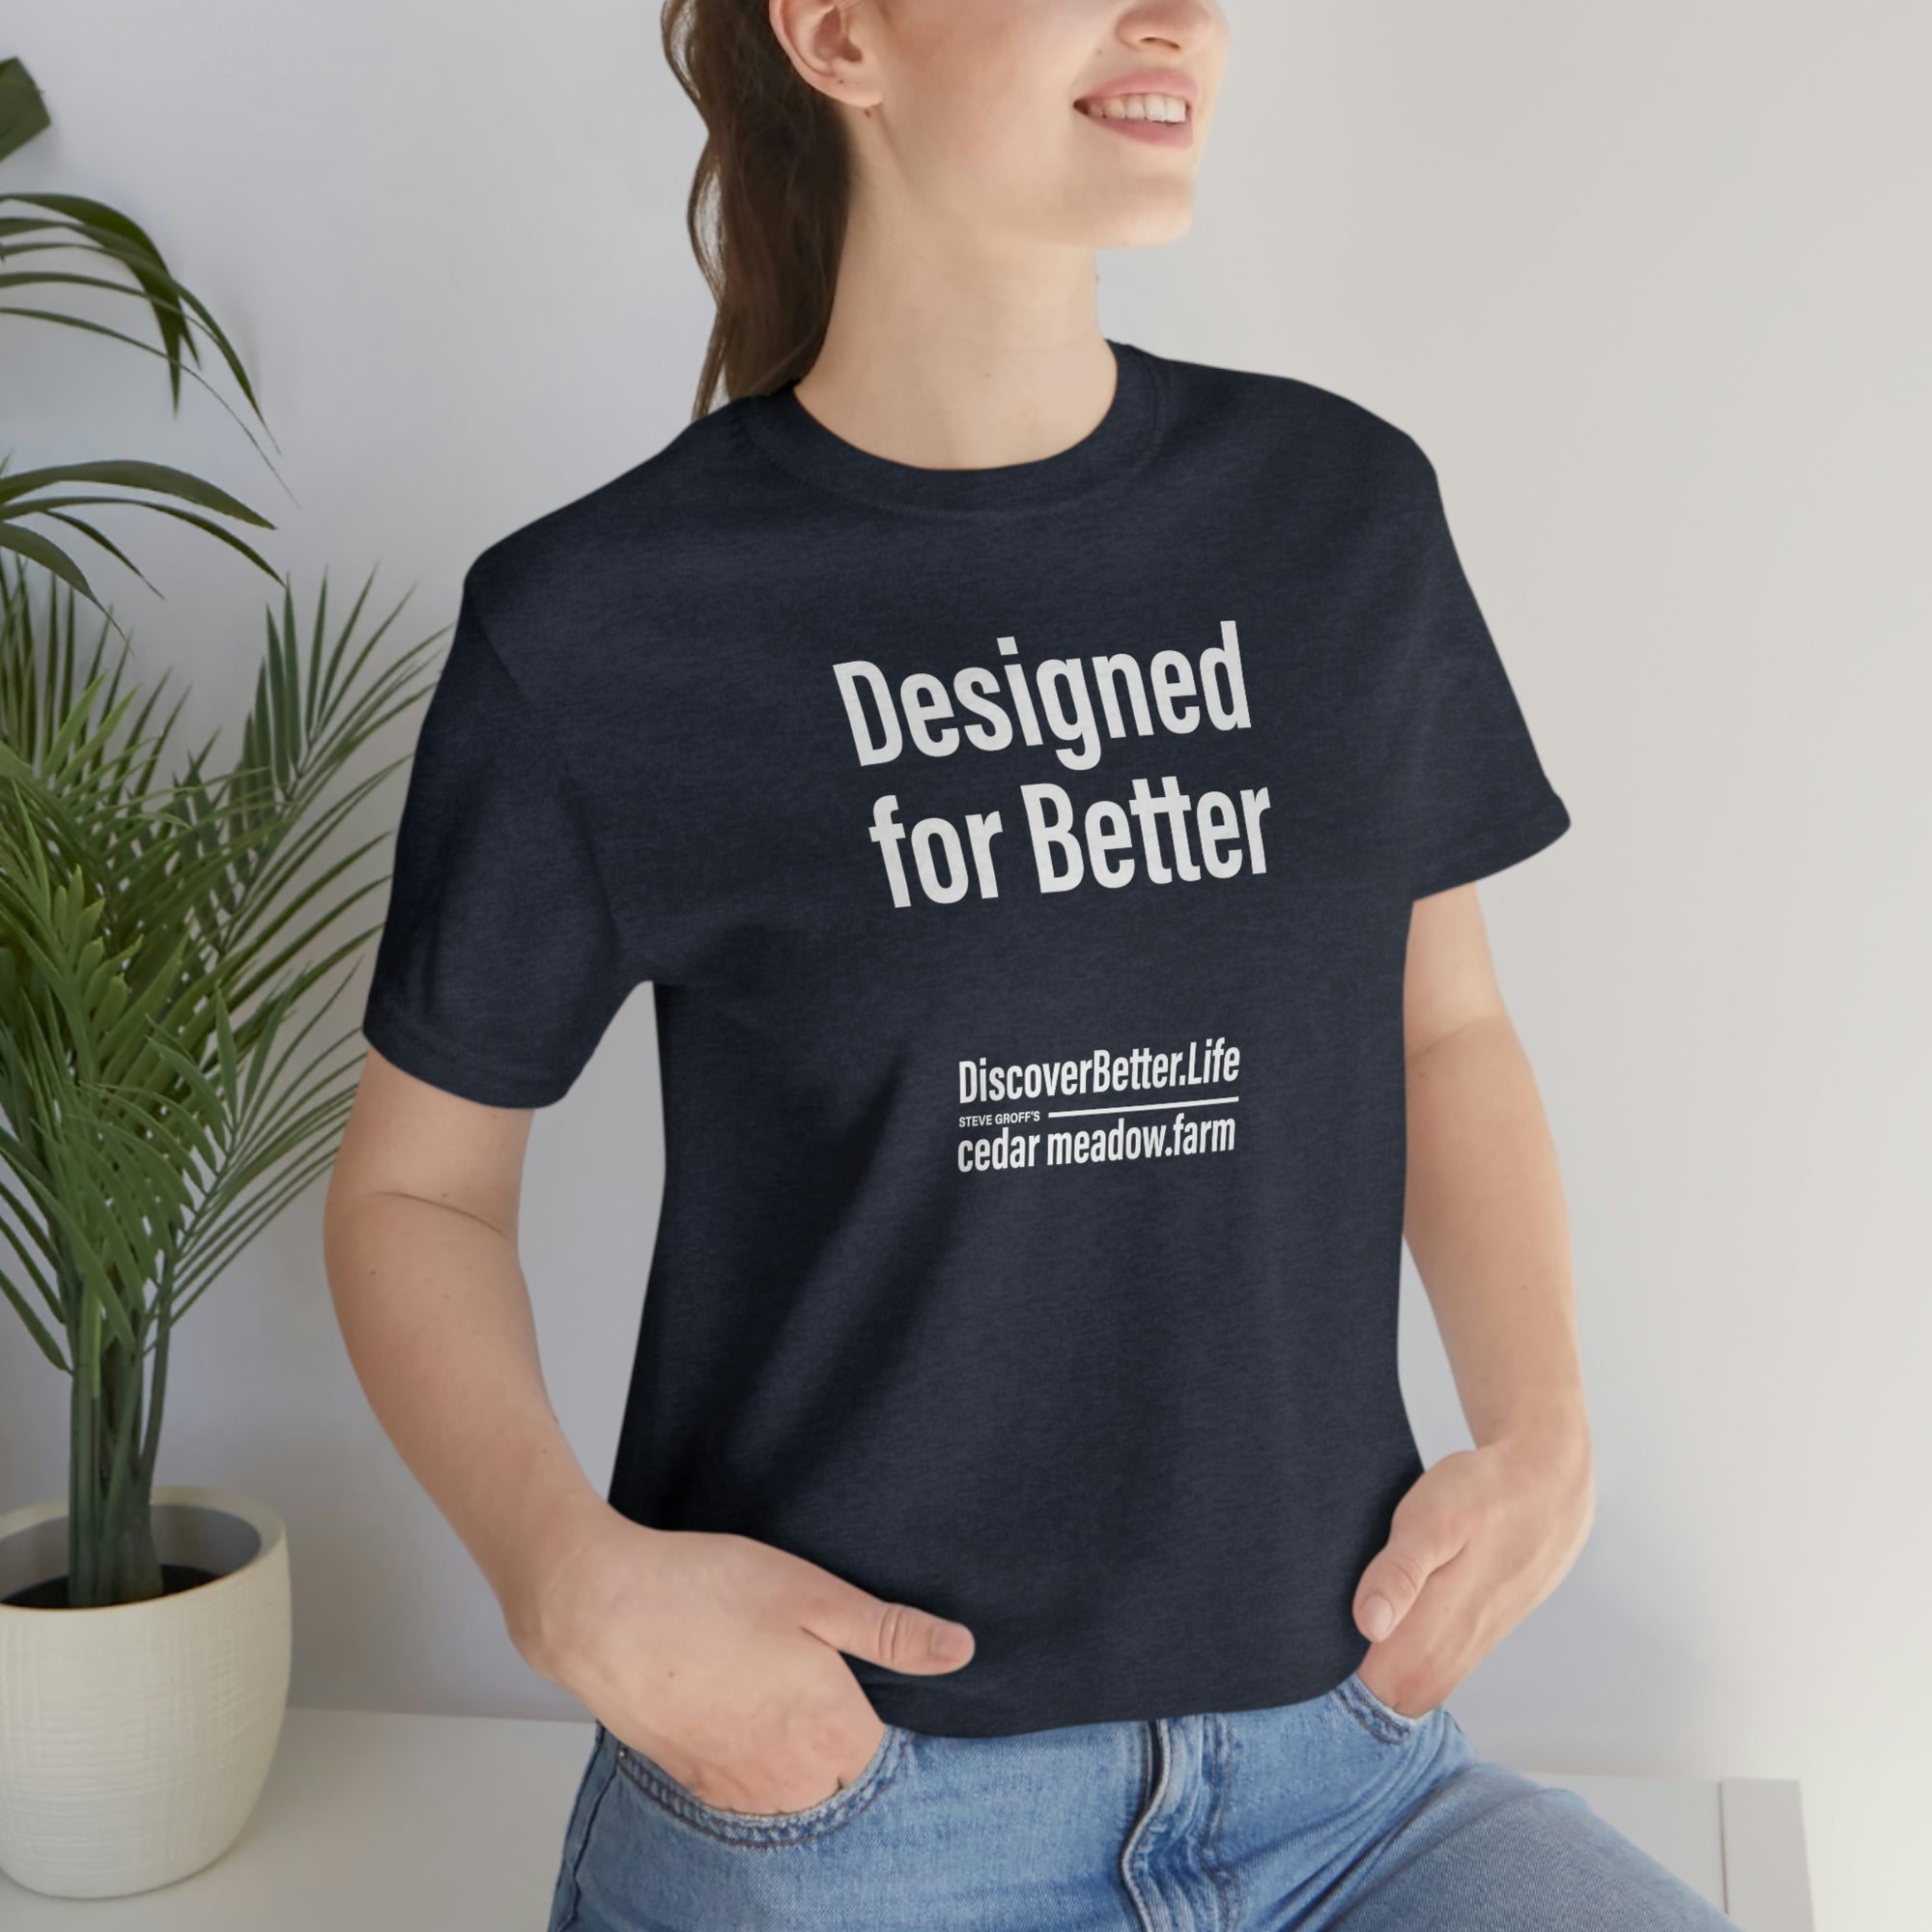 Designed for Better T-shirt-You know who you are. Feeling all the stresses, bumps and bruises of life, but pushing forward, because you know you're worth it. You're striving every day to make -Cedar Meadow Farm